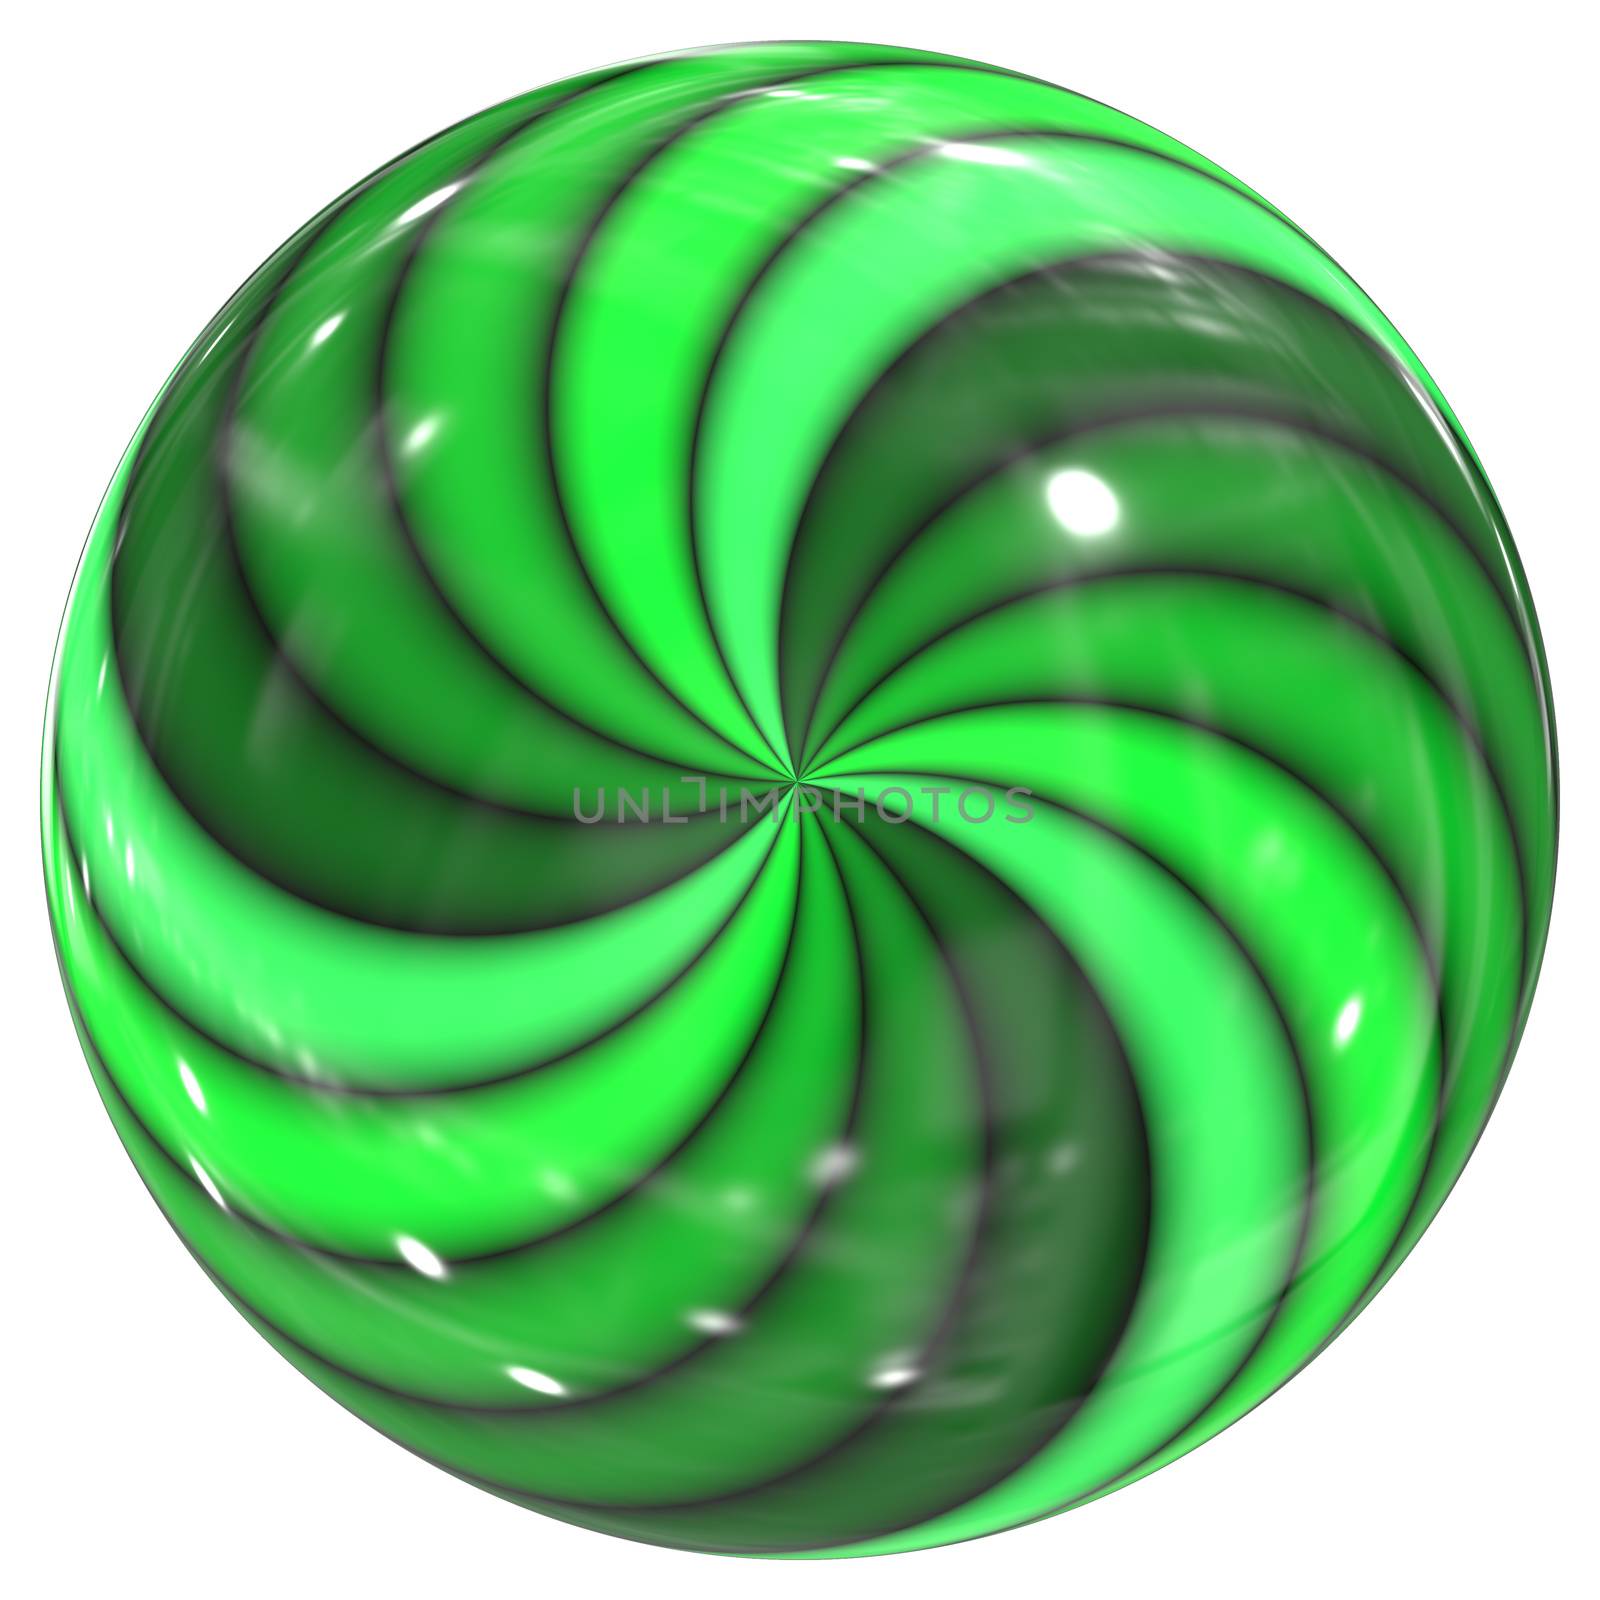 An illustration of a green swirl glass sphere